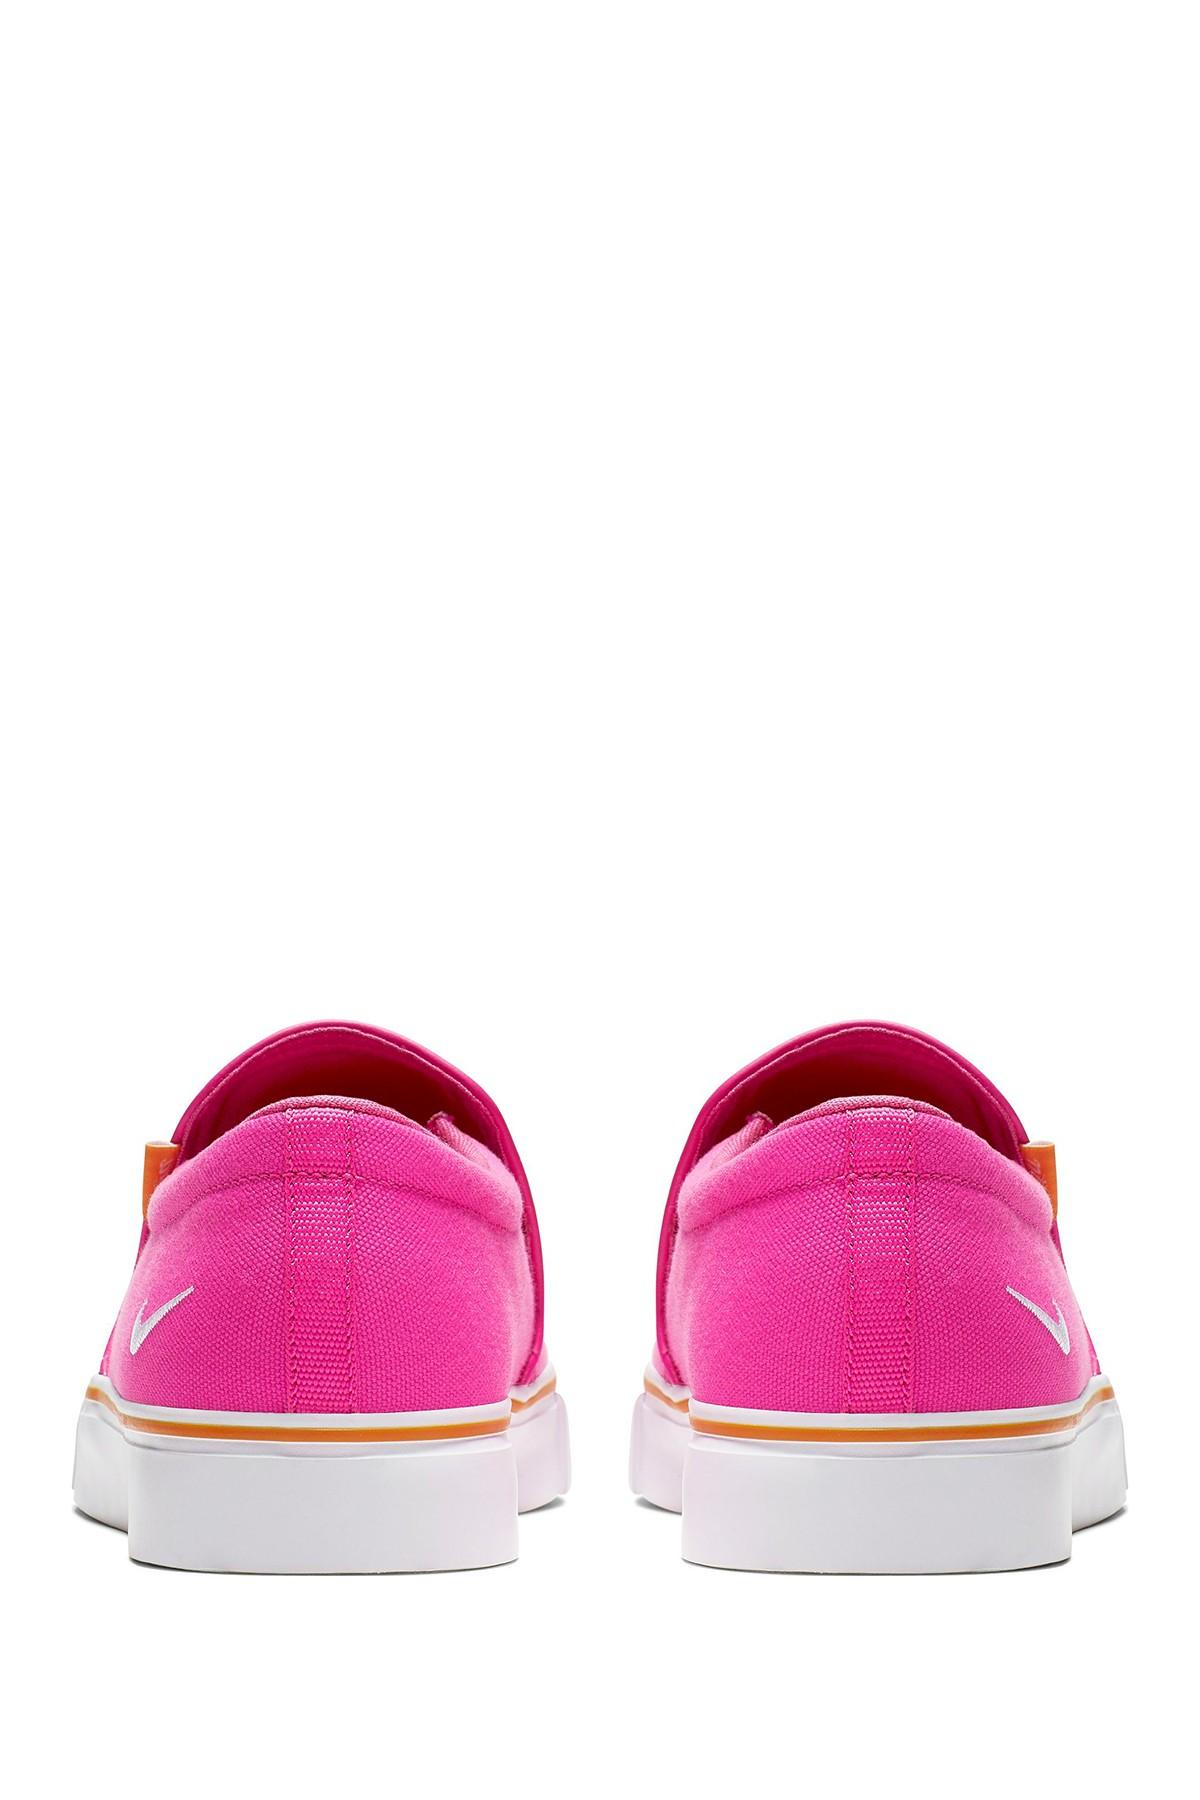 Nike Court Royale Ac Slip-on Sneaker in Pink | Lyst